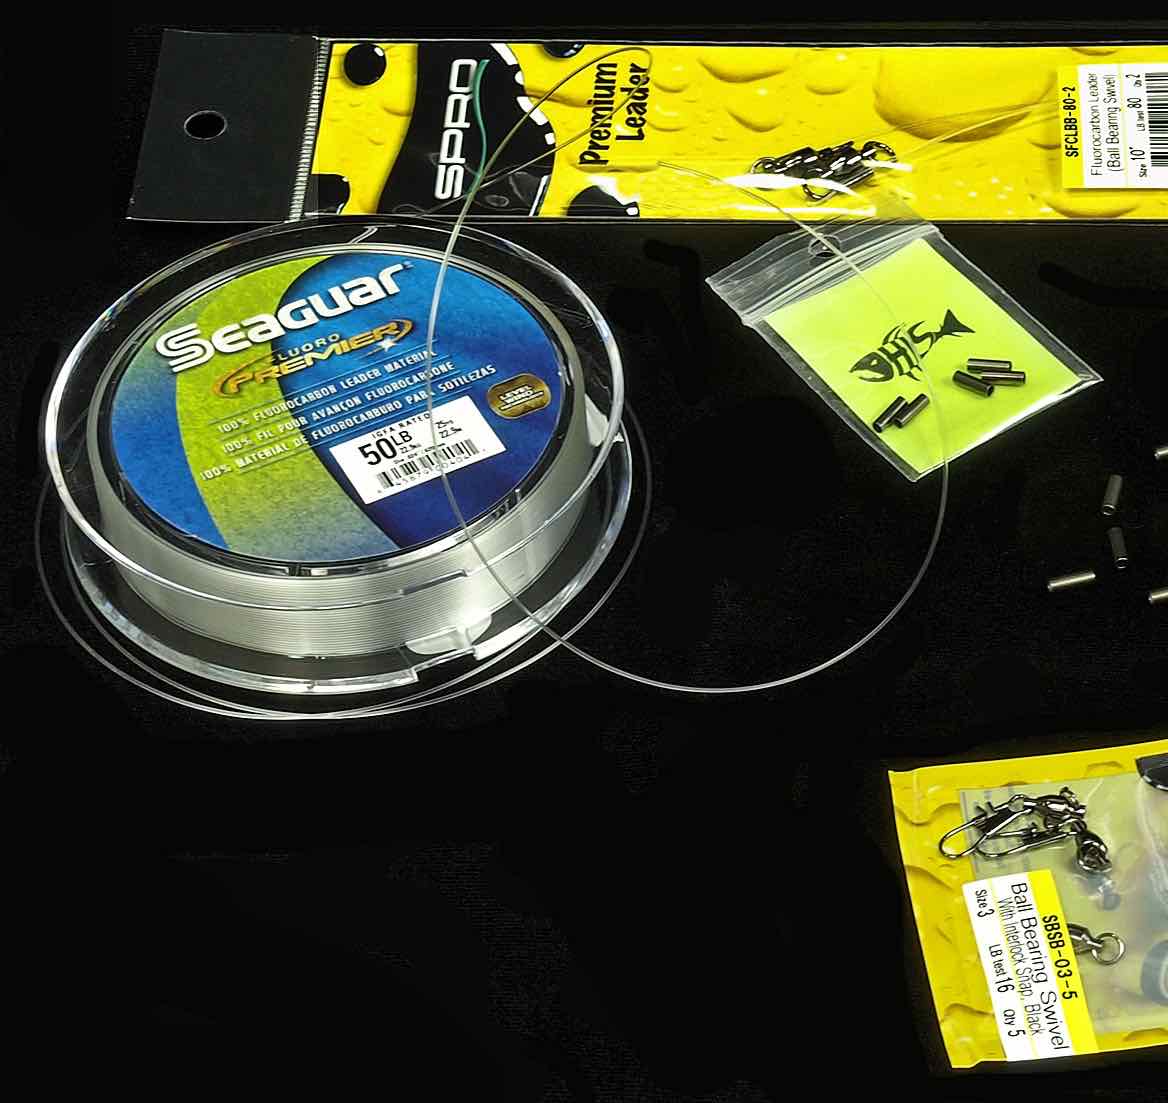 Seaguar Monofilament, Fluorocarbon, Tapered Leaders and Tippets